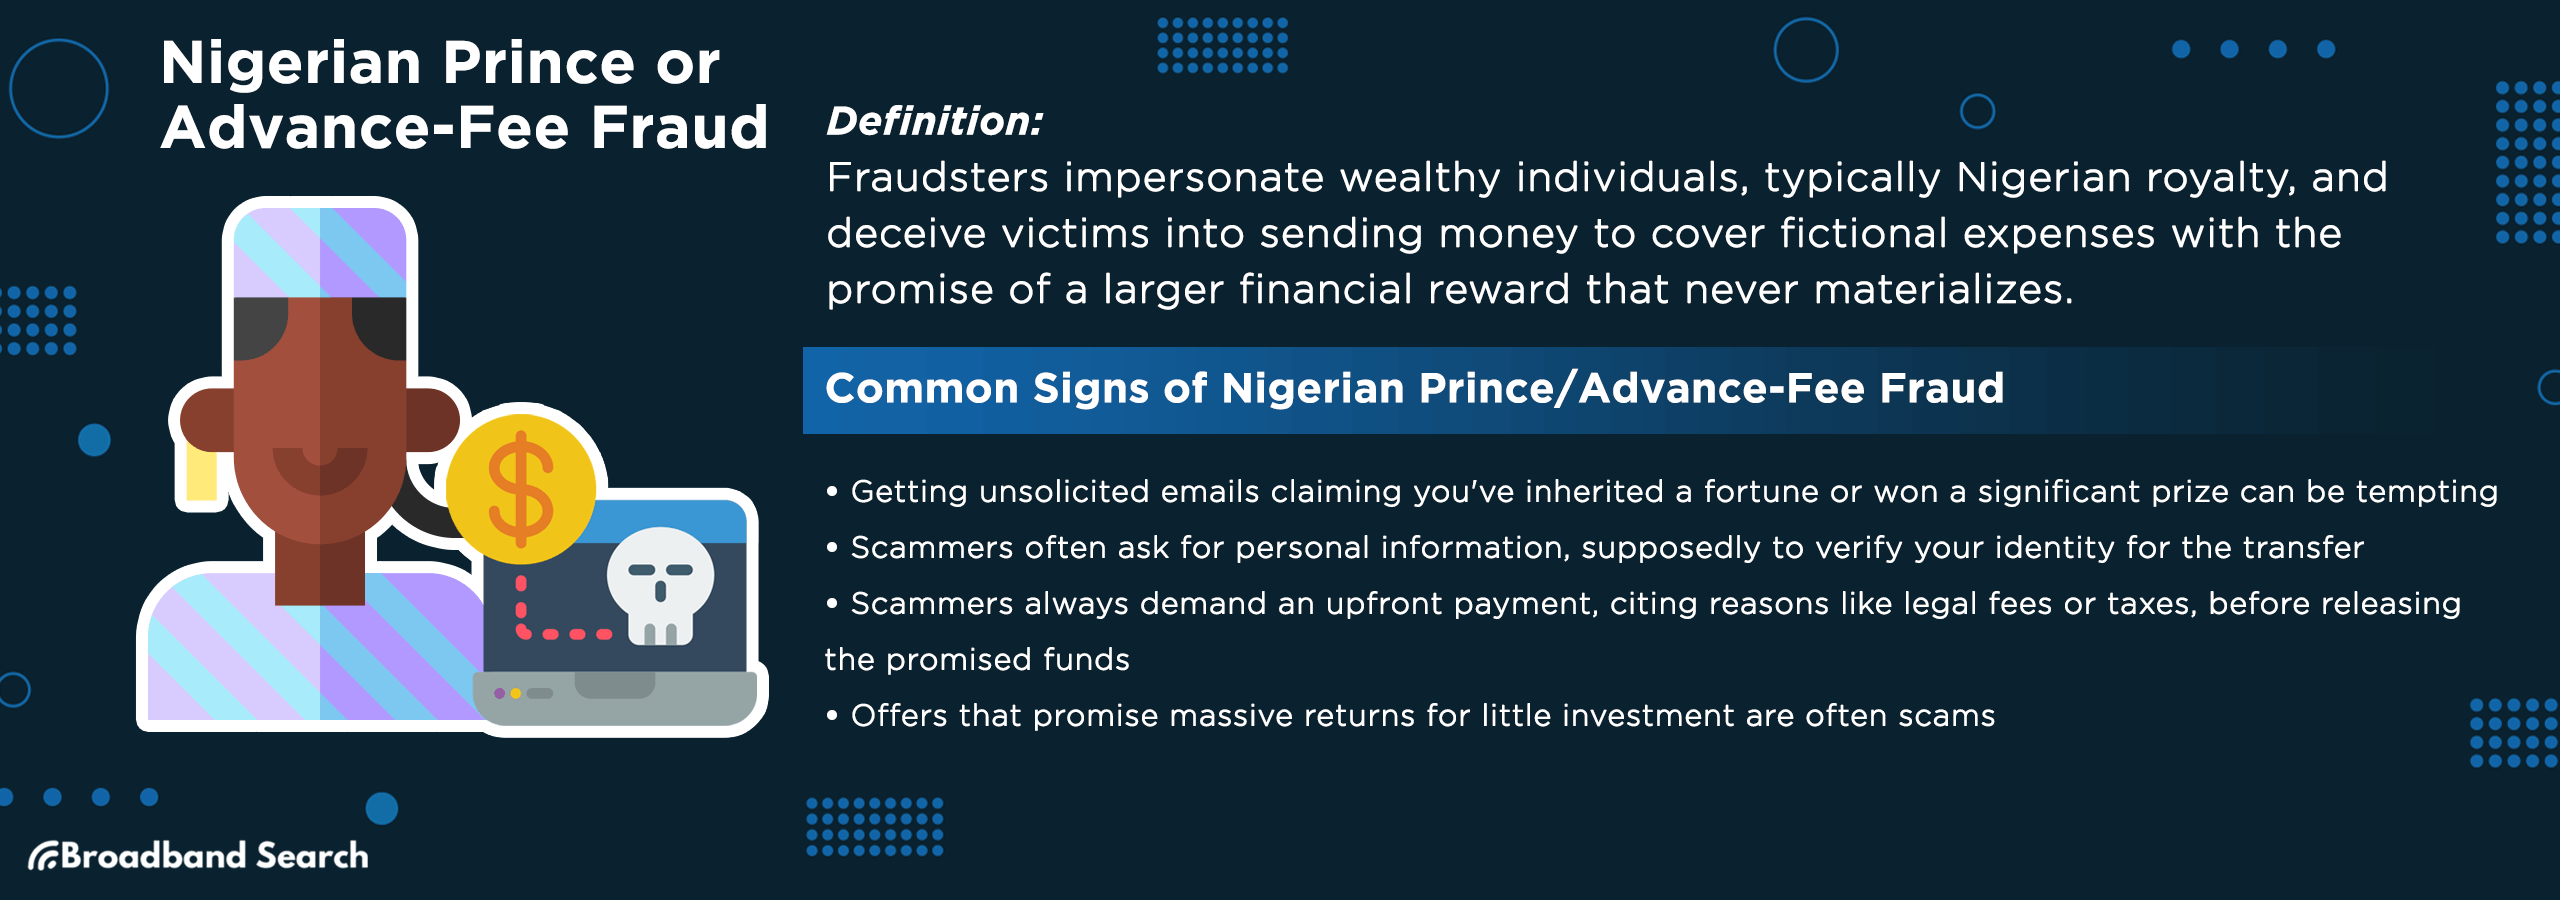 Definition and signs of Nigerian prince or advance-fee fraud